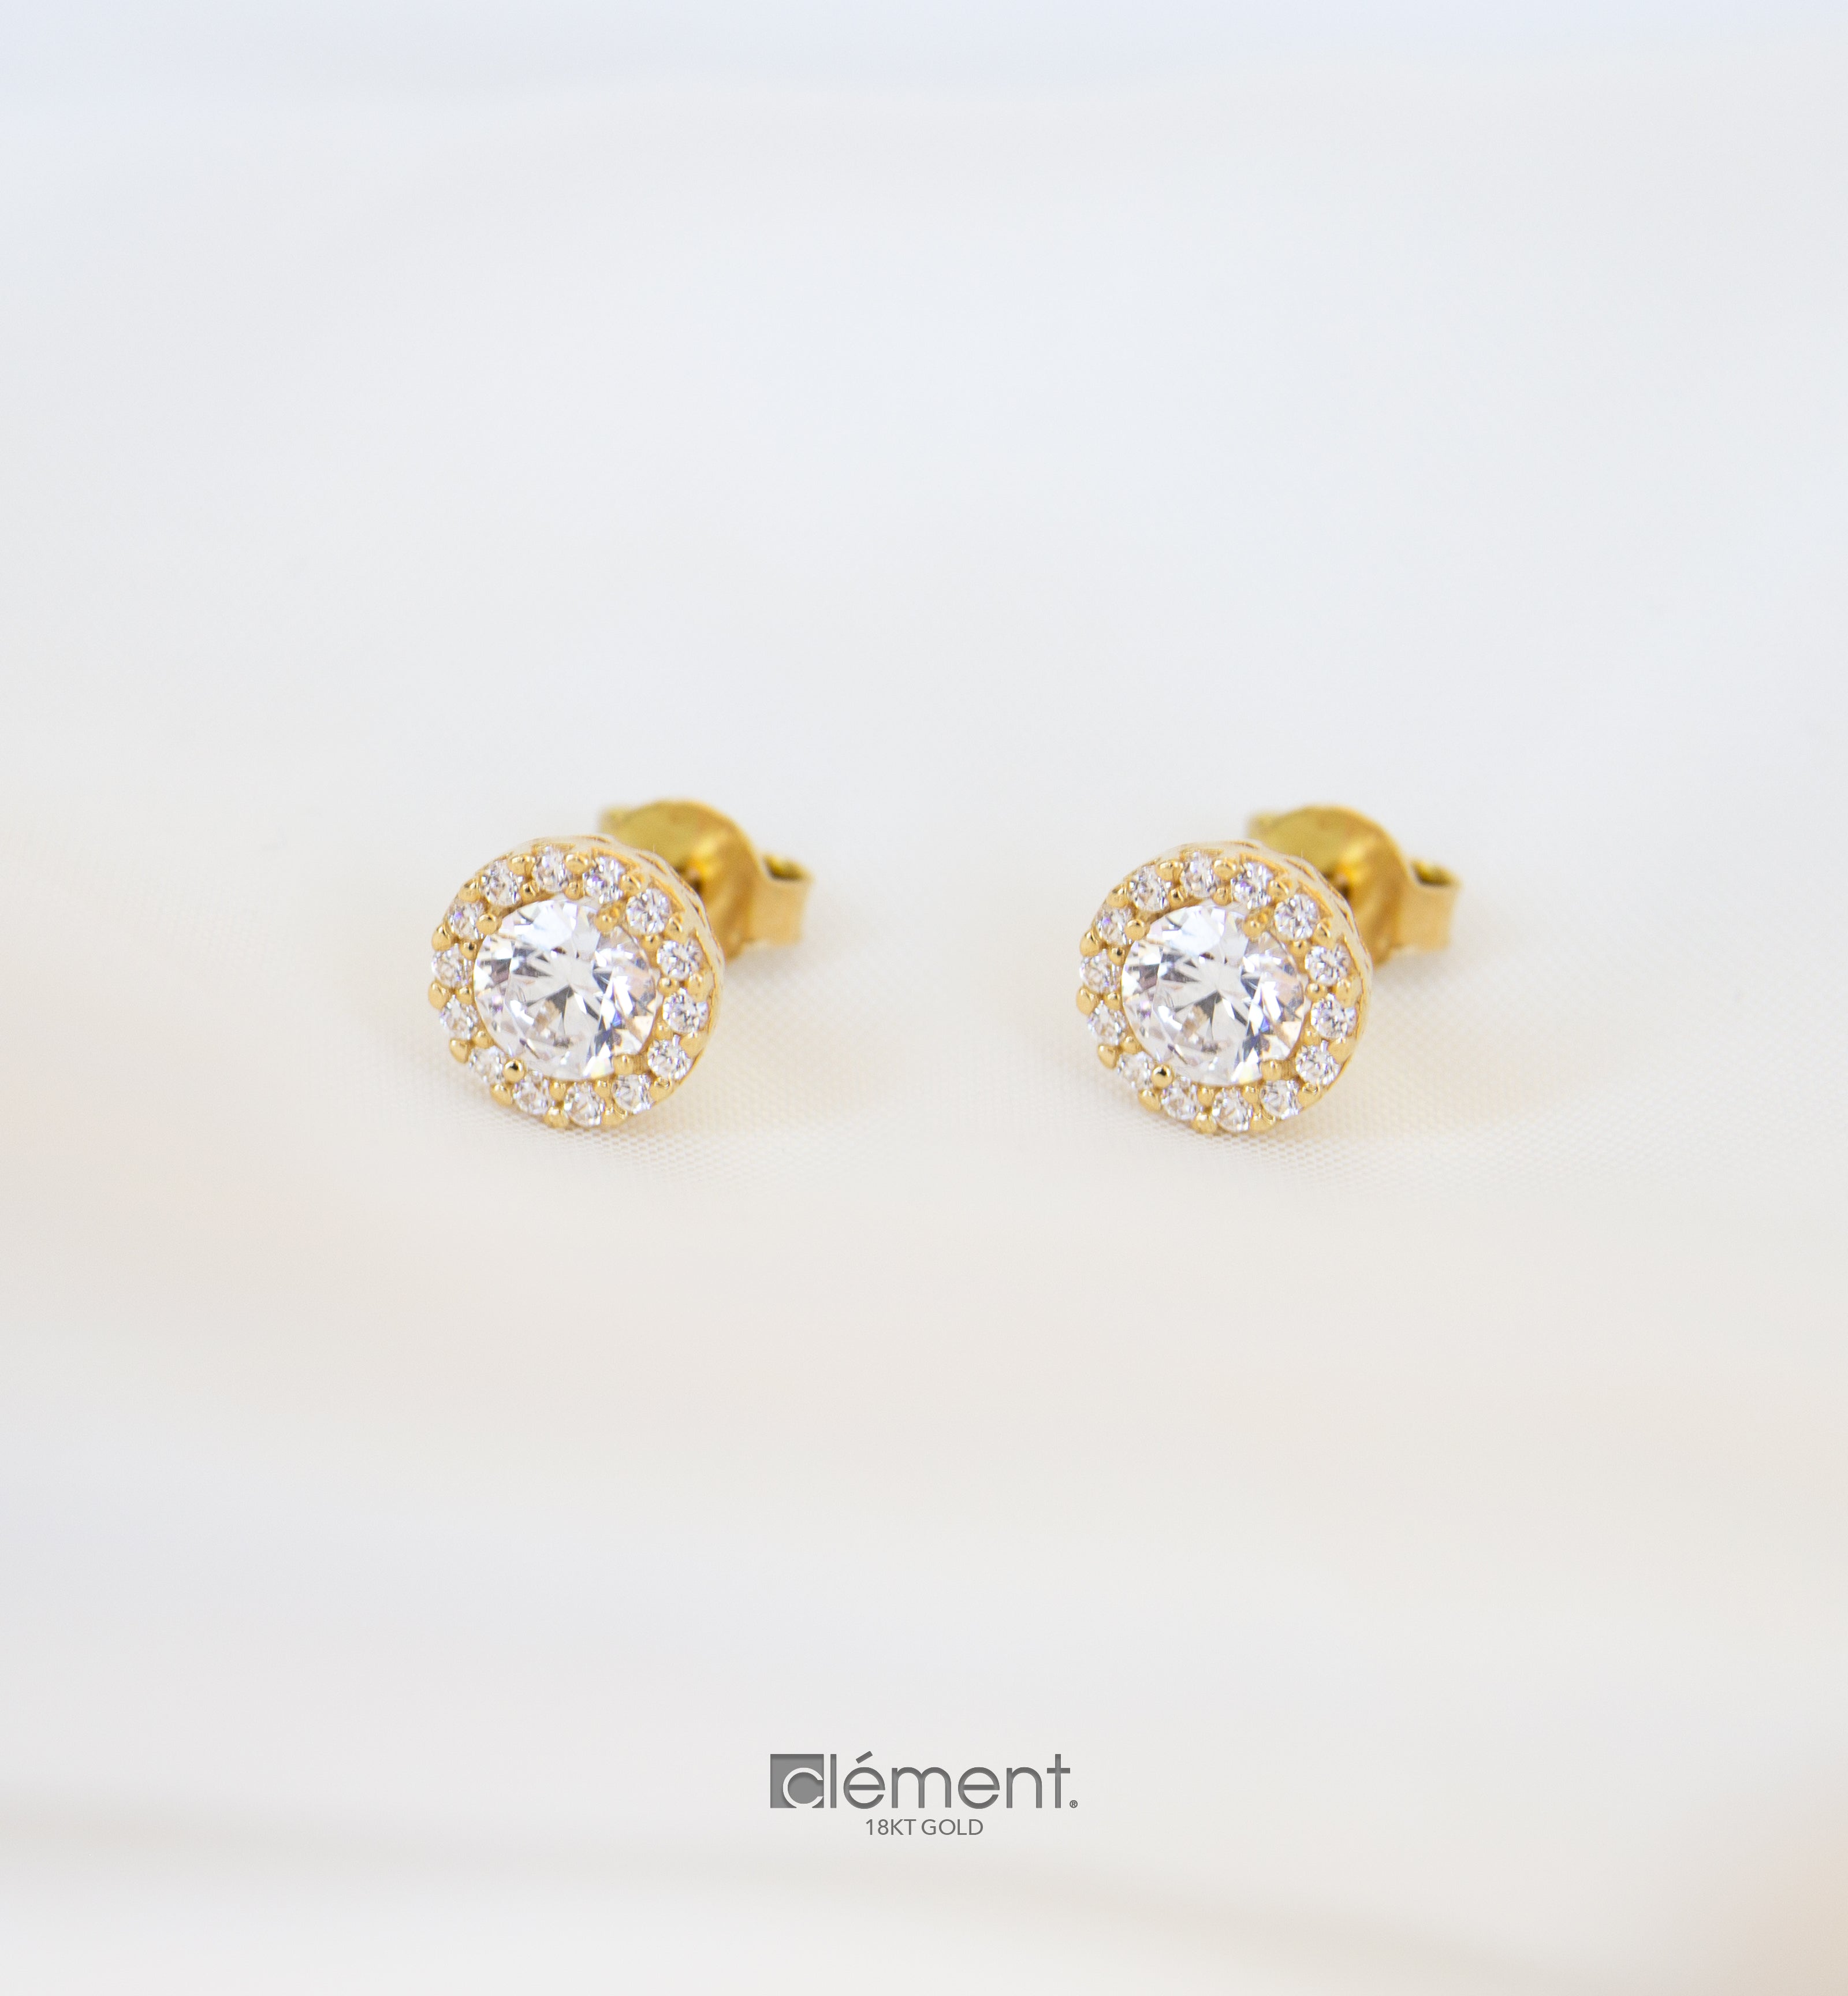 18ct Yellow Gold Earrings With Cubic Zircon Stones